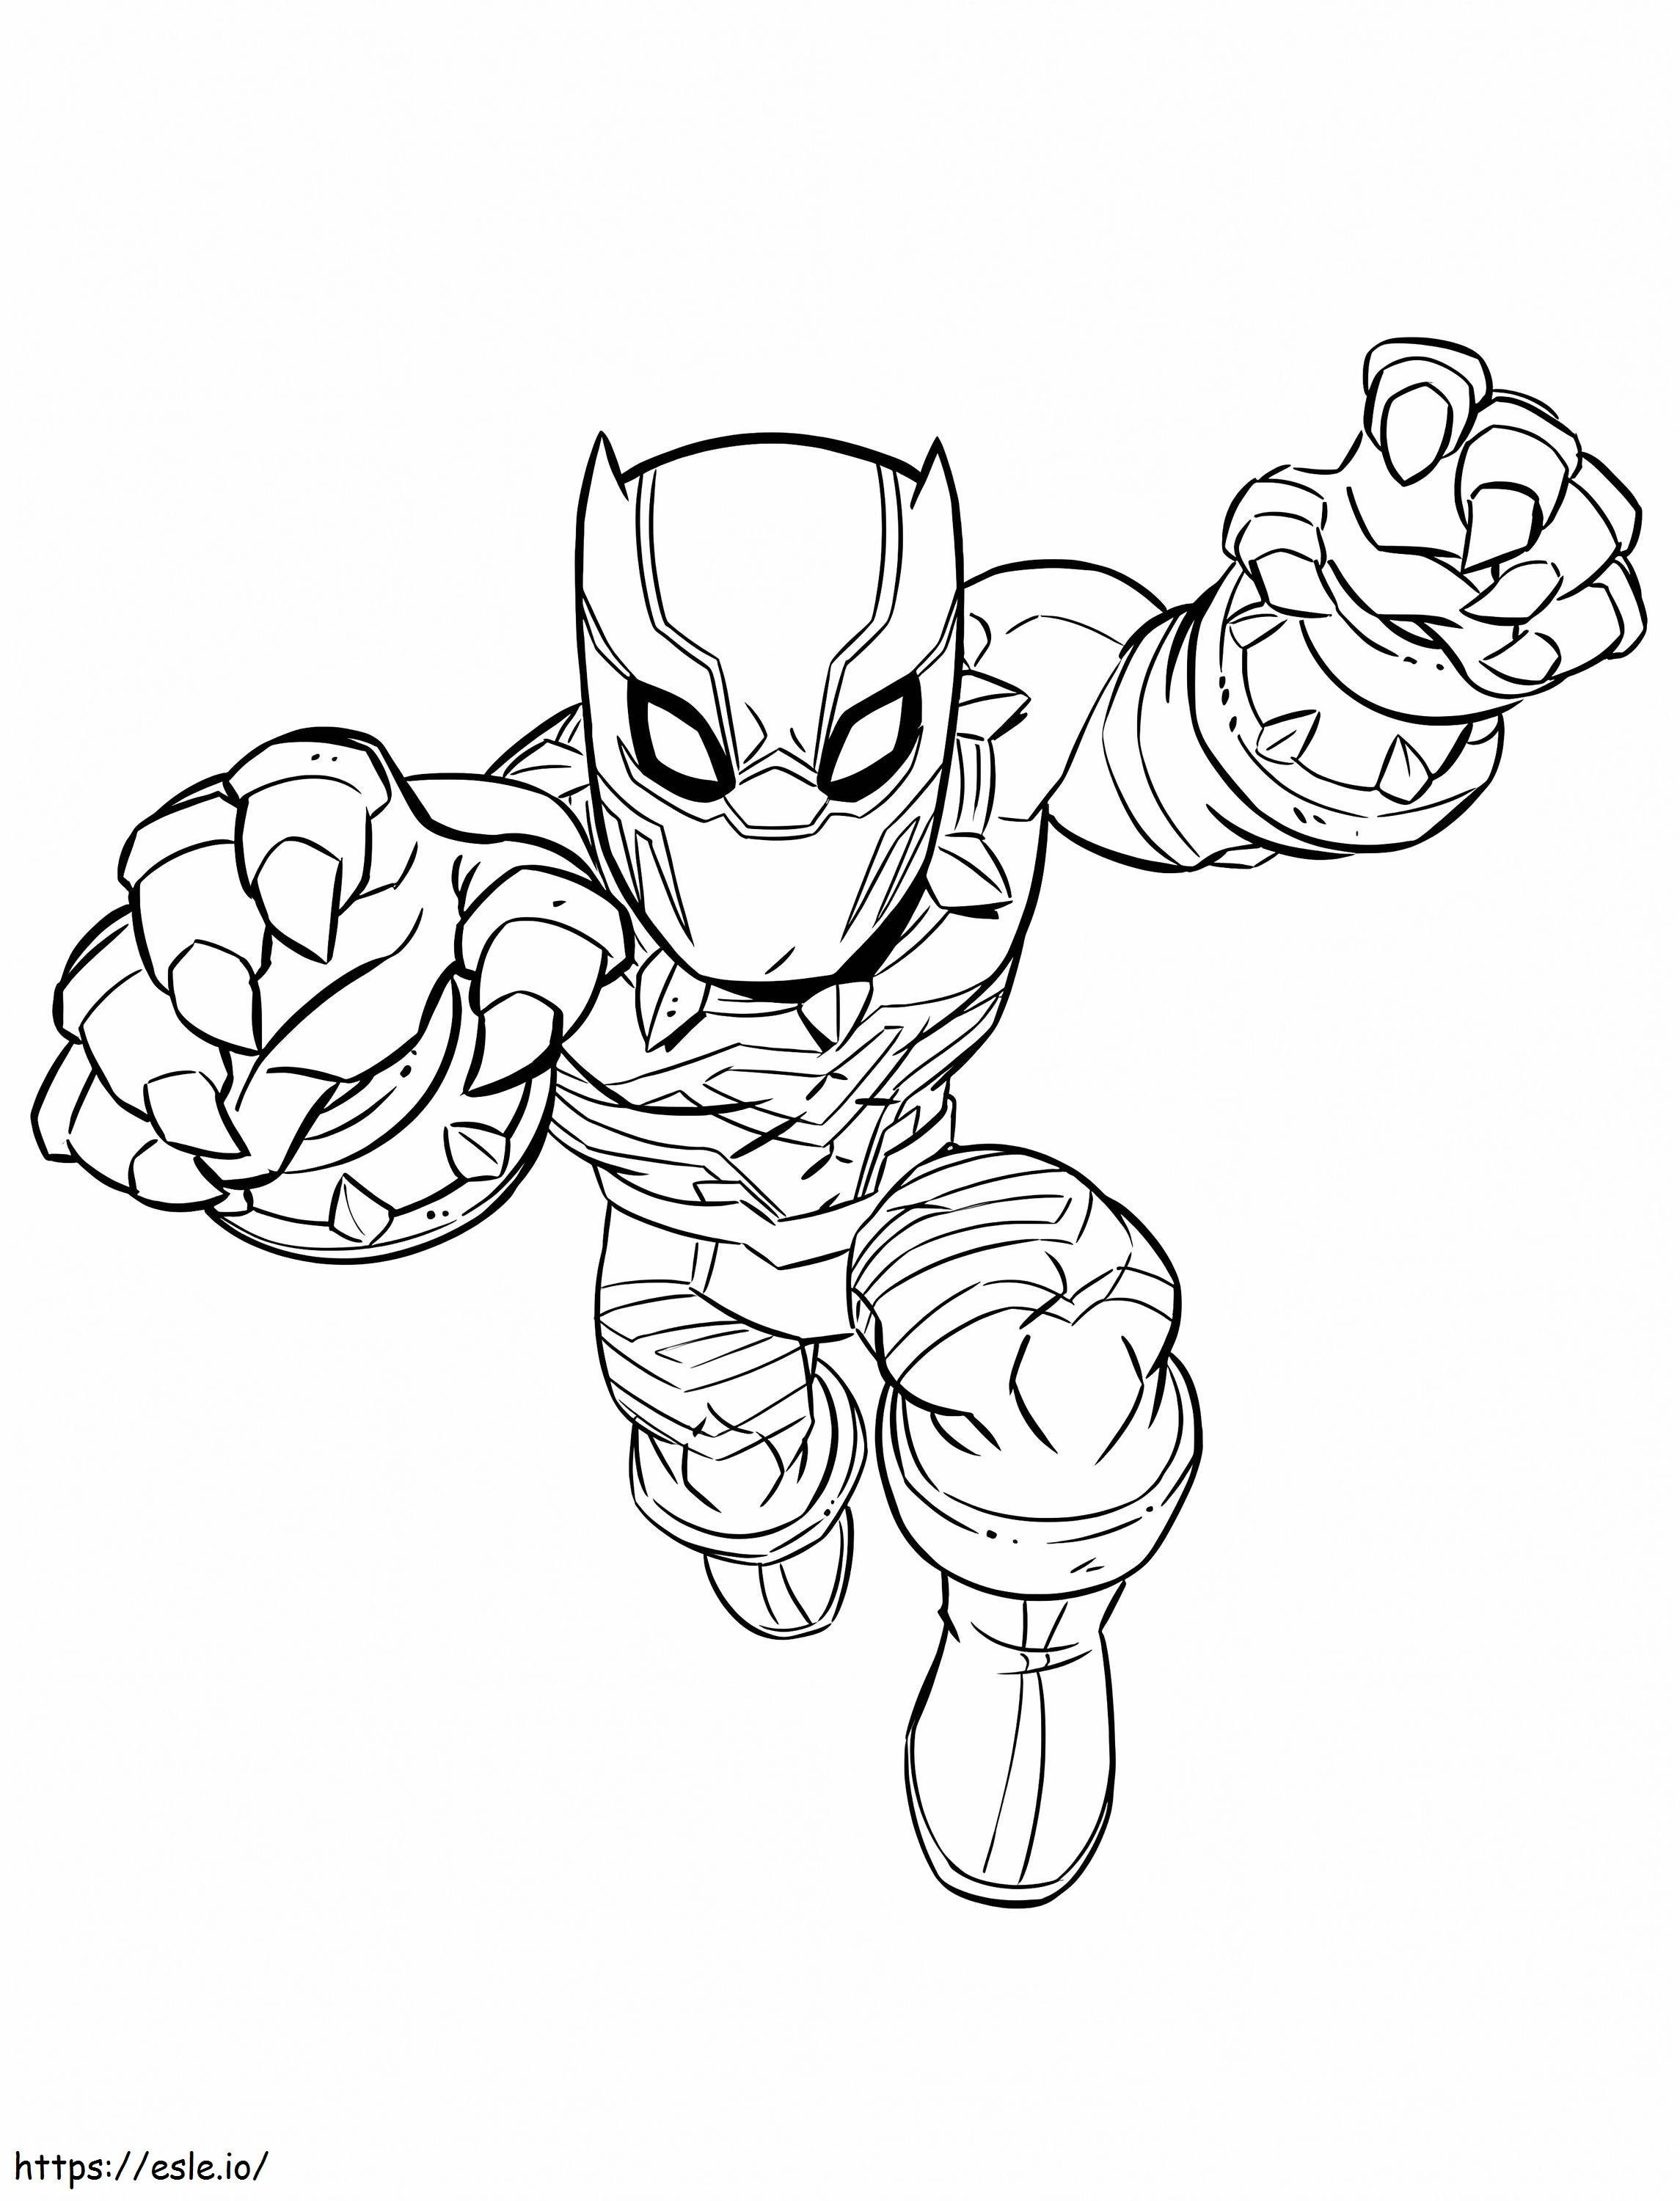 Black Panther 4 coloring page